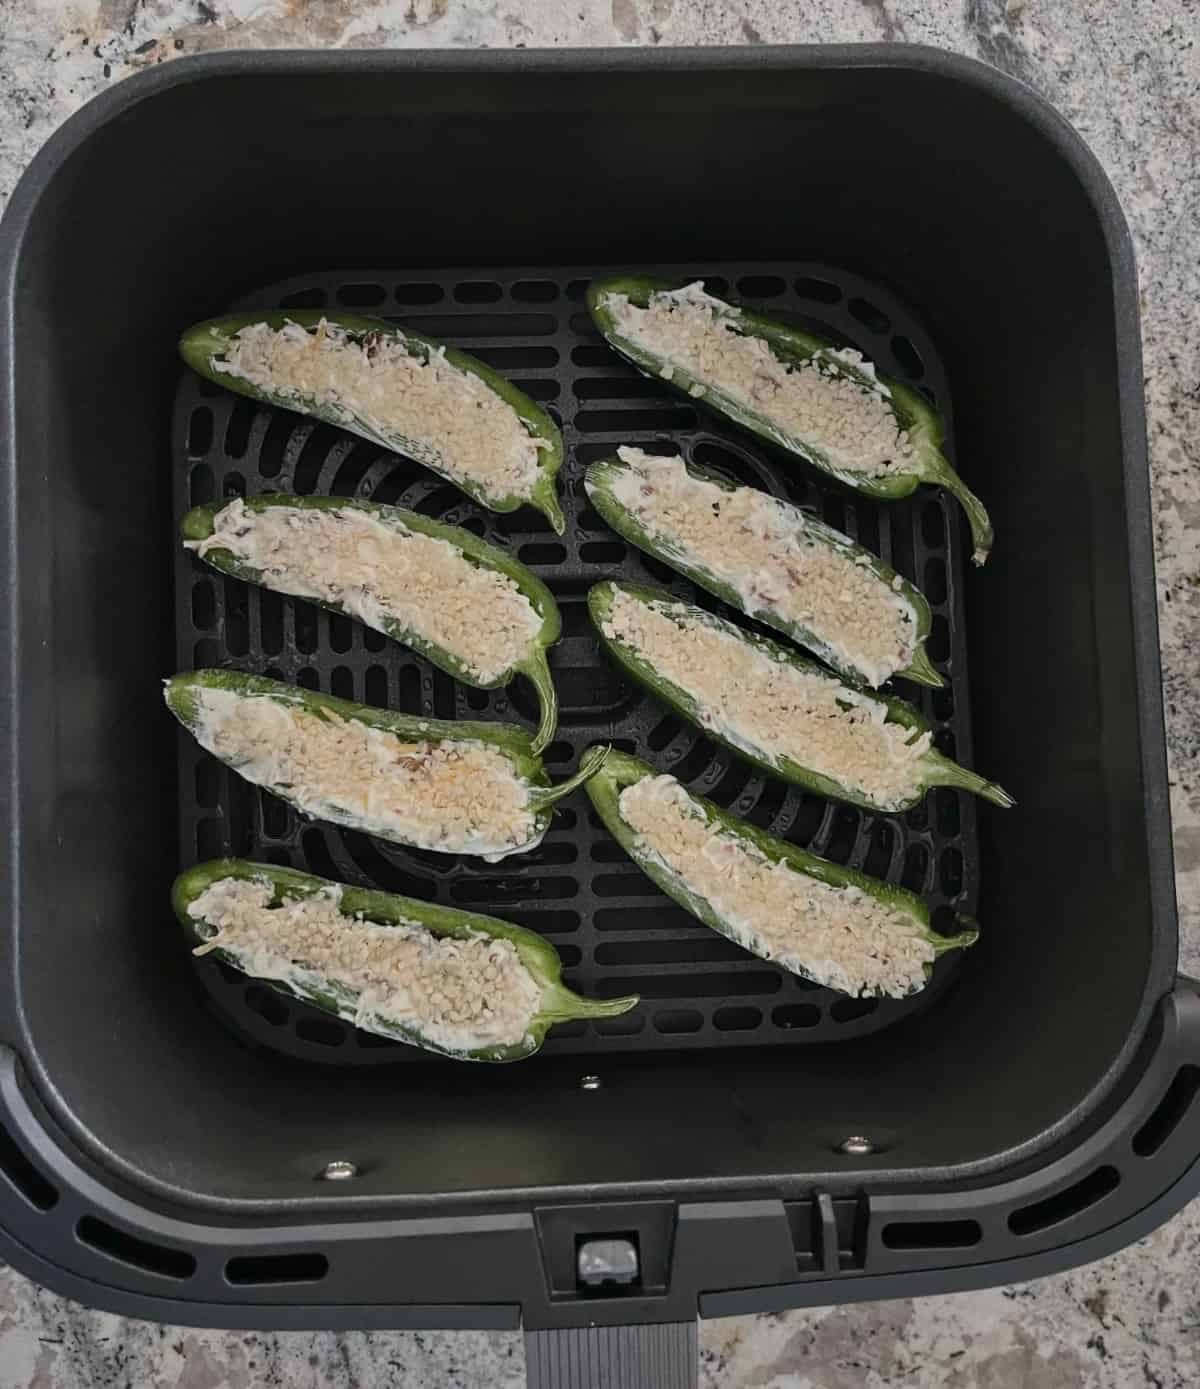 Uncooked jalapeno poppers in air fryer basket.